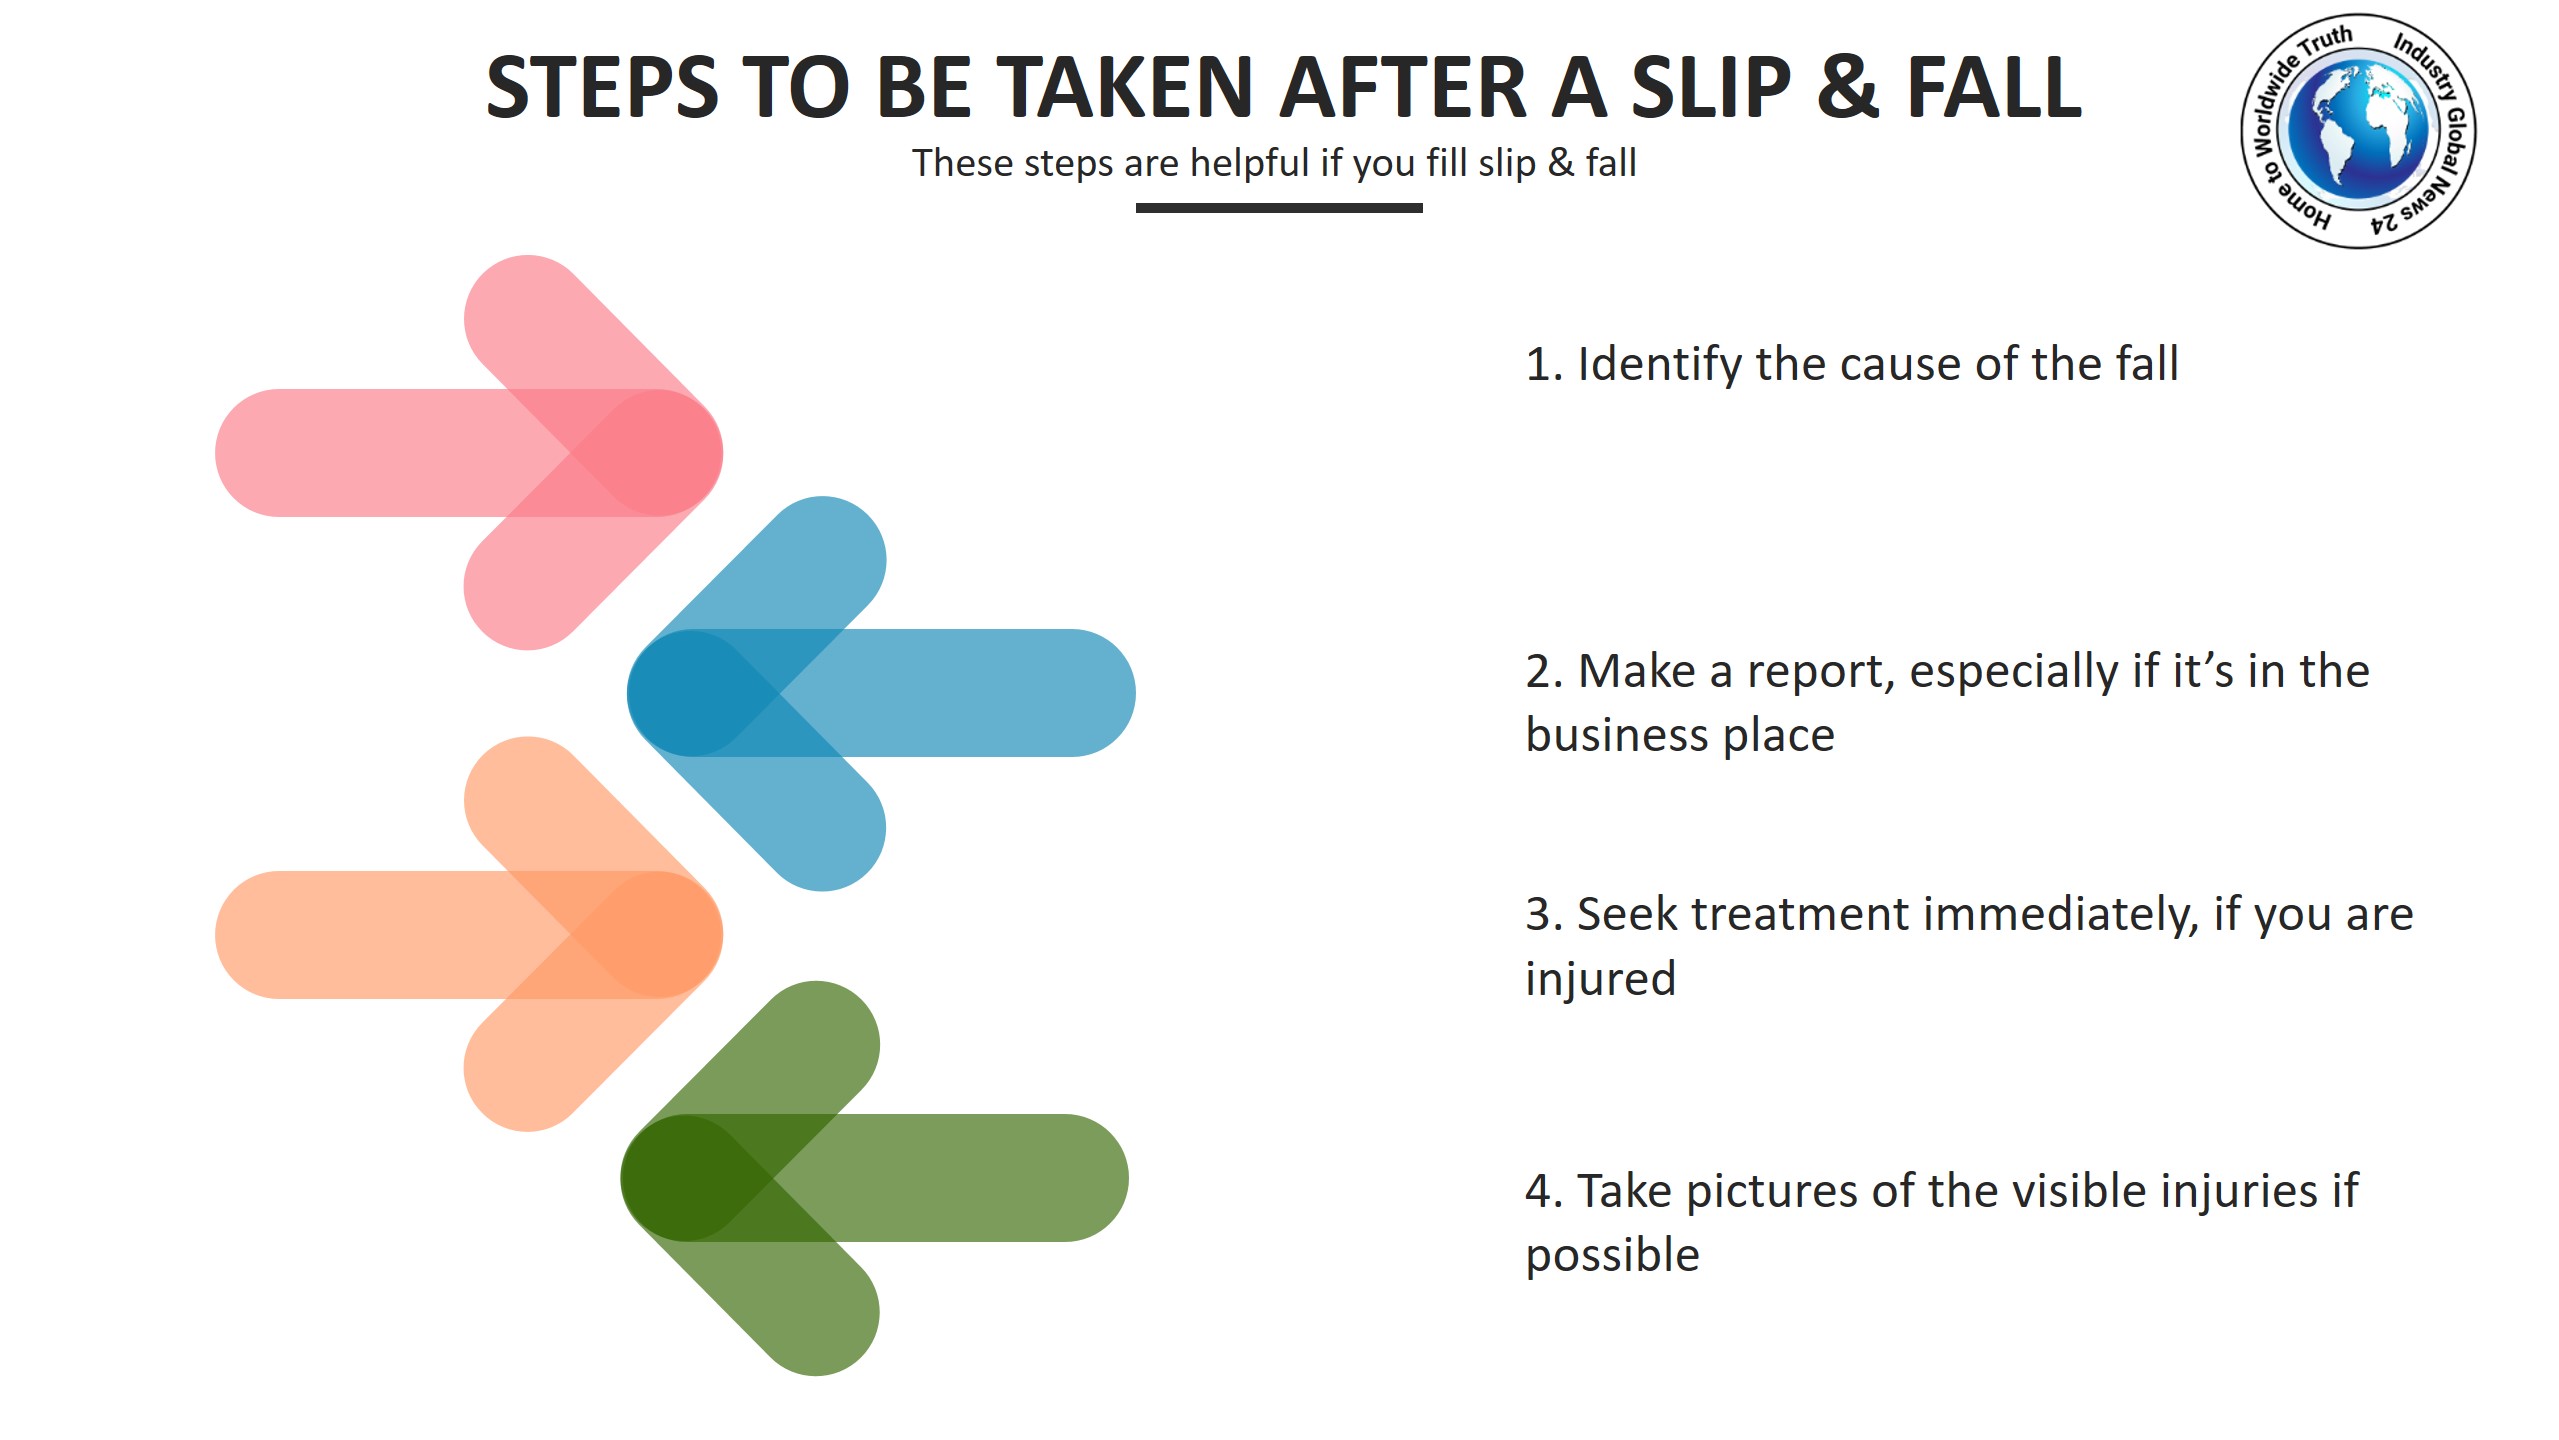 Steps to be taken after a slip & fall